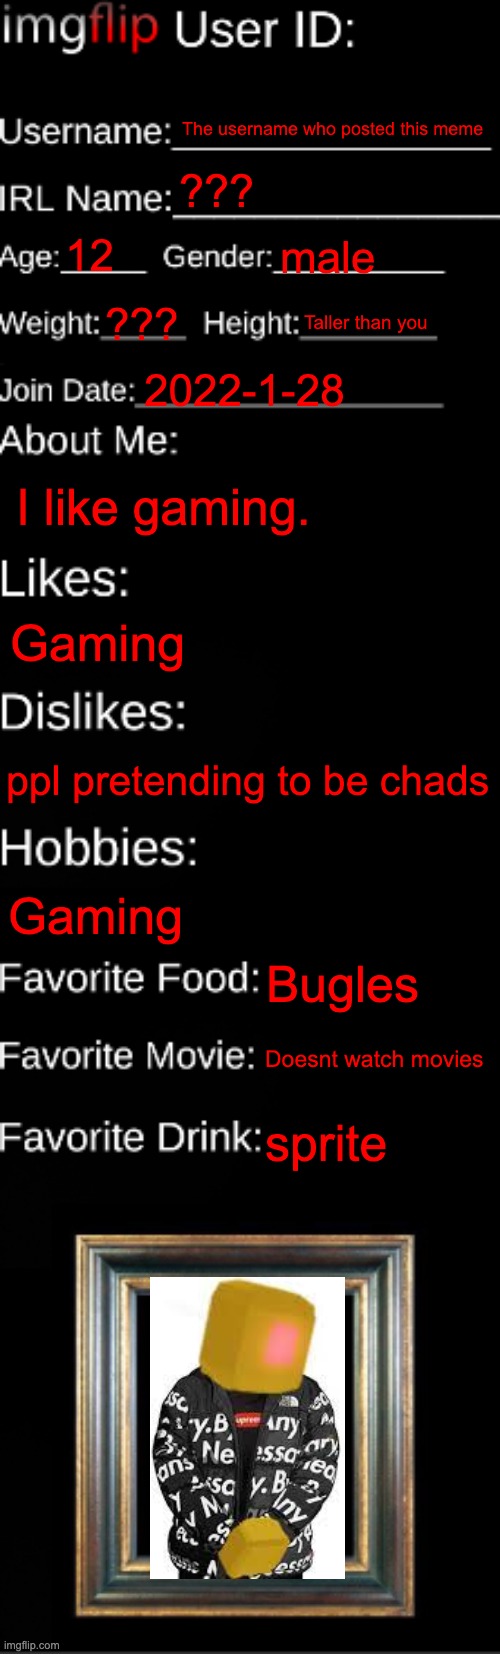 Me | The username who posted this meme; ??? 12; male; ??? Taller than you; 2022-1-28; I like gaming. Gaming; ppl pretending to be chads; Gaming; Bugles; Doesnt watch movies; sprite | image tagged in imgflip id card | made w/ Imgflip meme maker